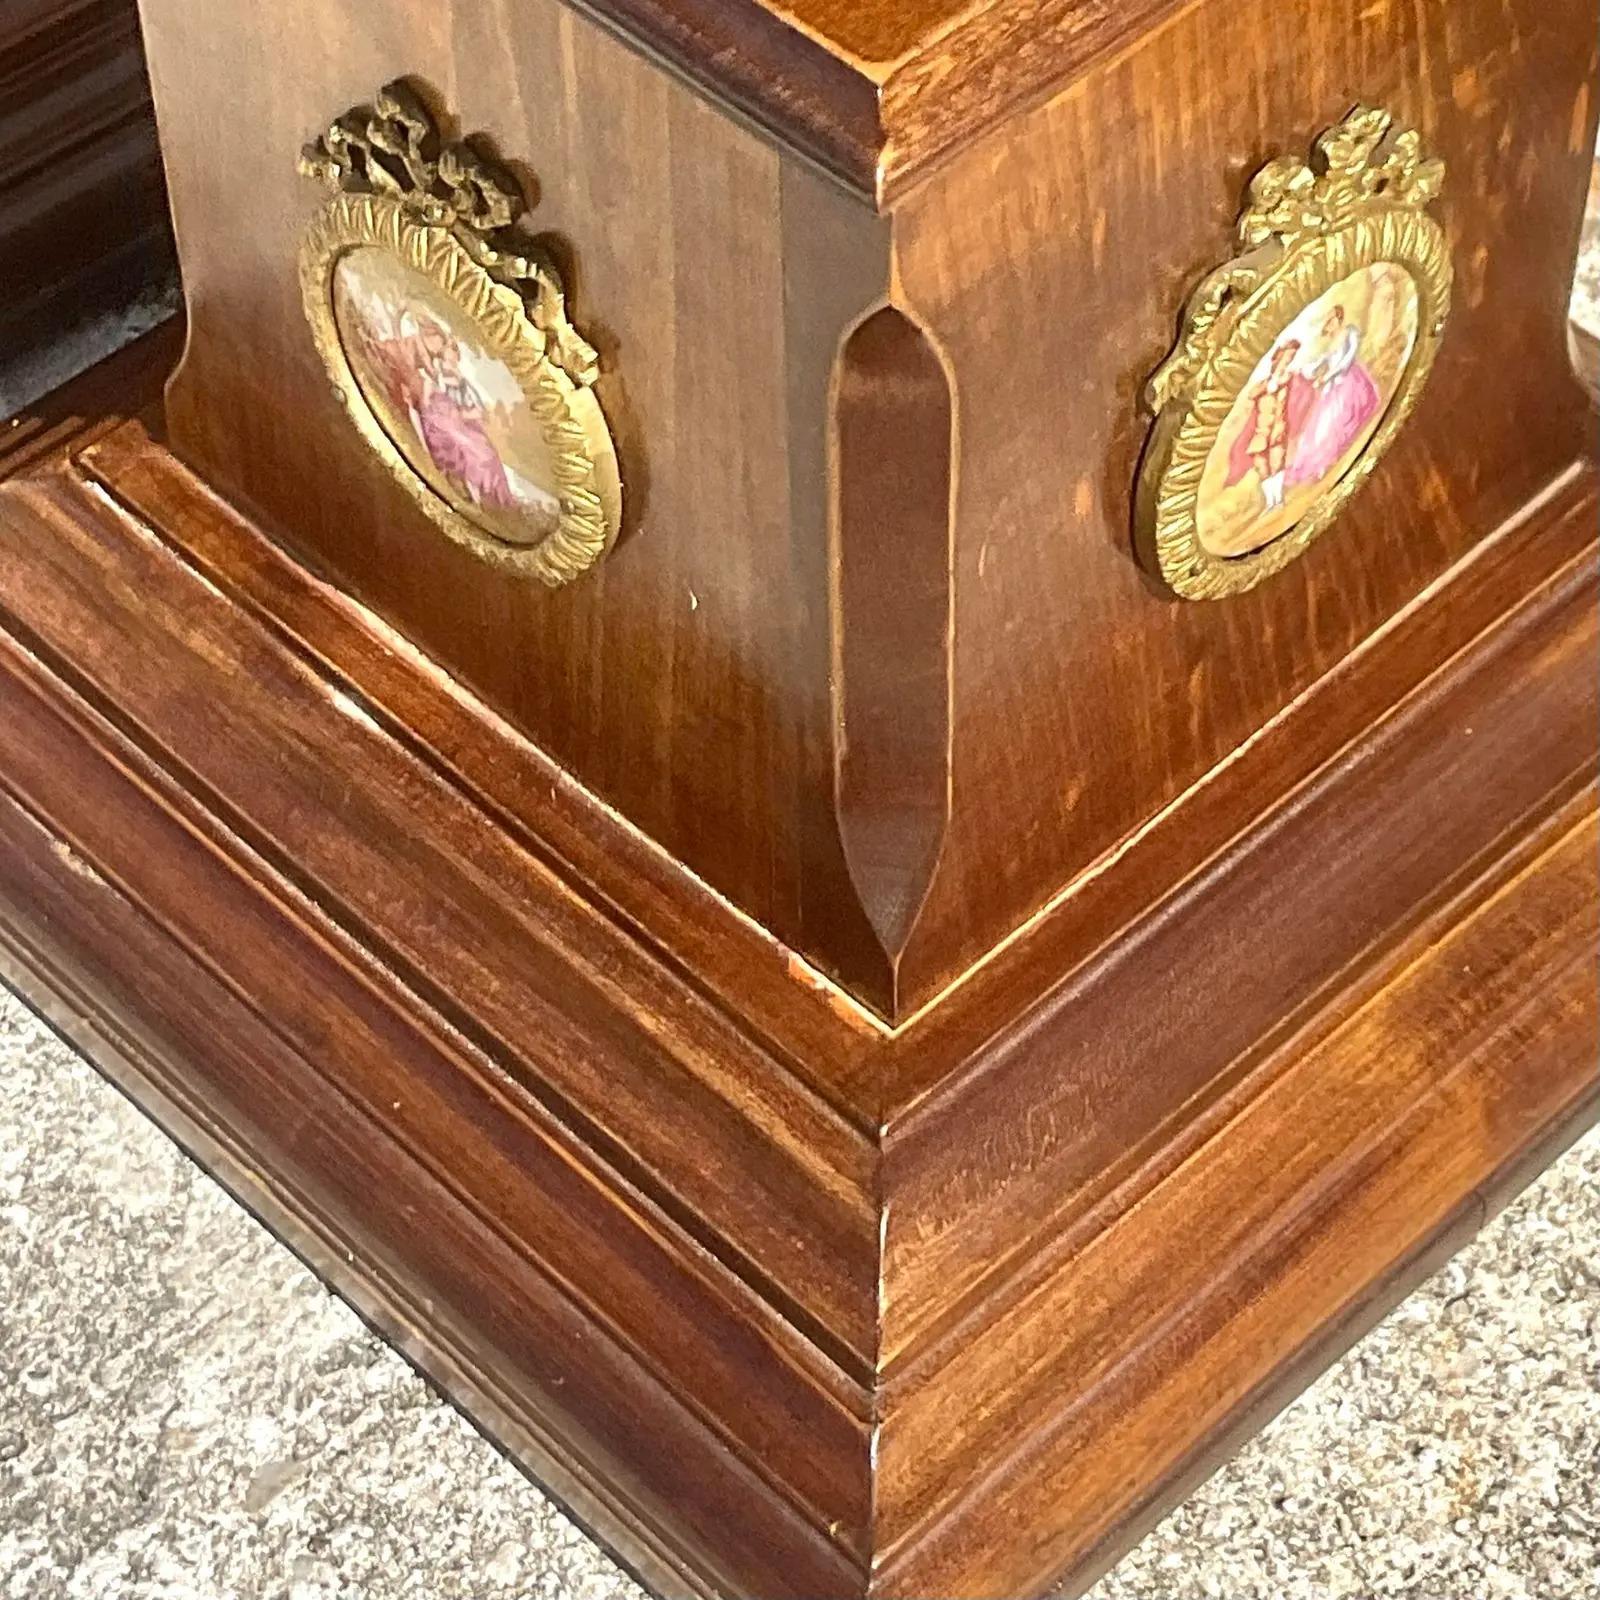 North American Vintage Regency Wedgwood Cameo Pedestals - a Pair For Sale